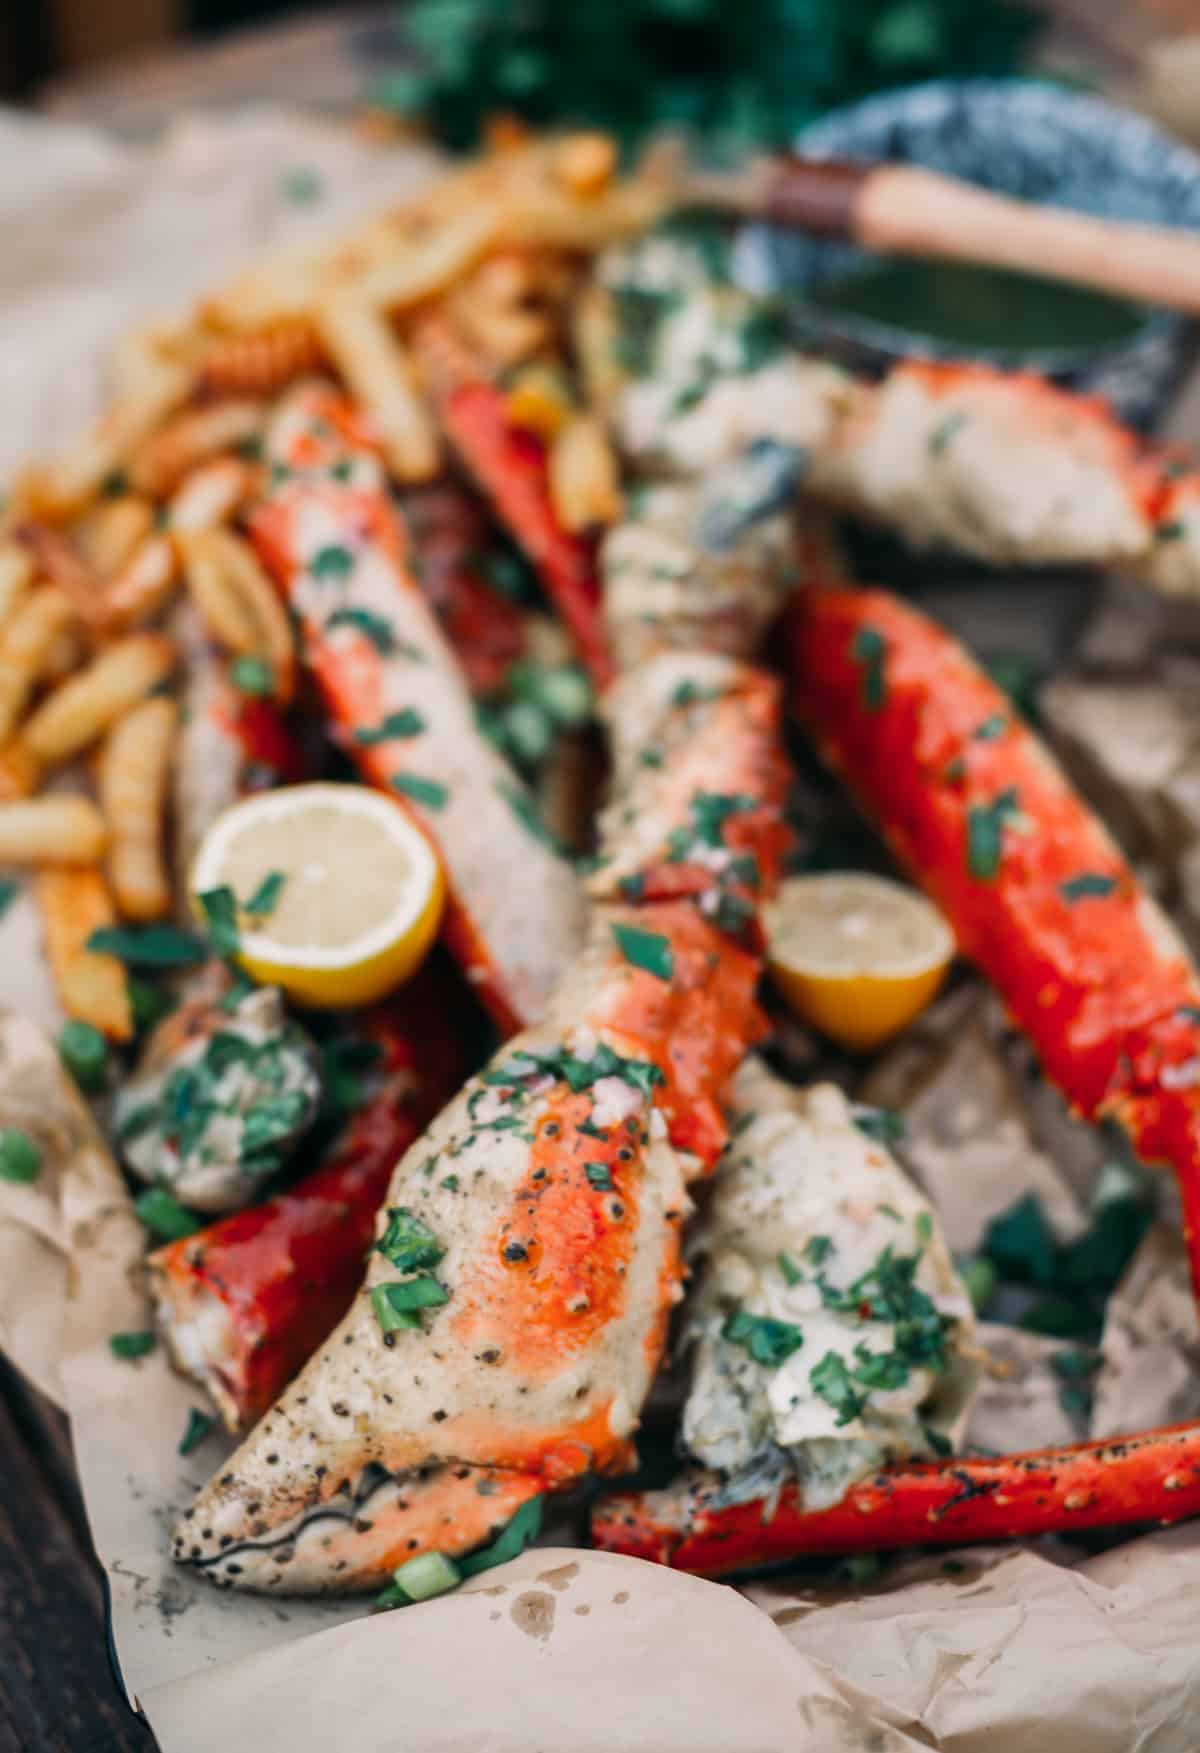 Grilled king crab legs on a paper with lemons and herbs. 